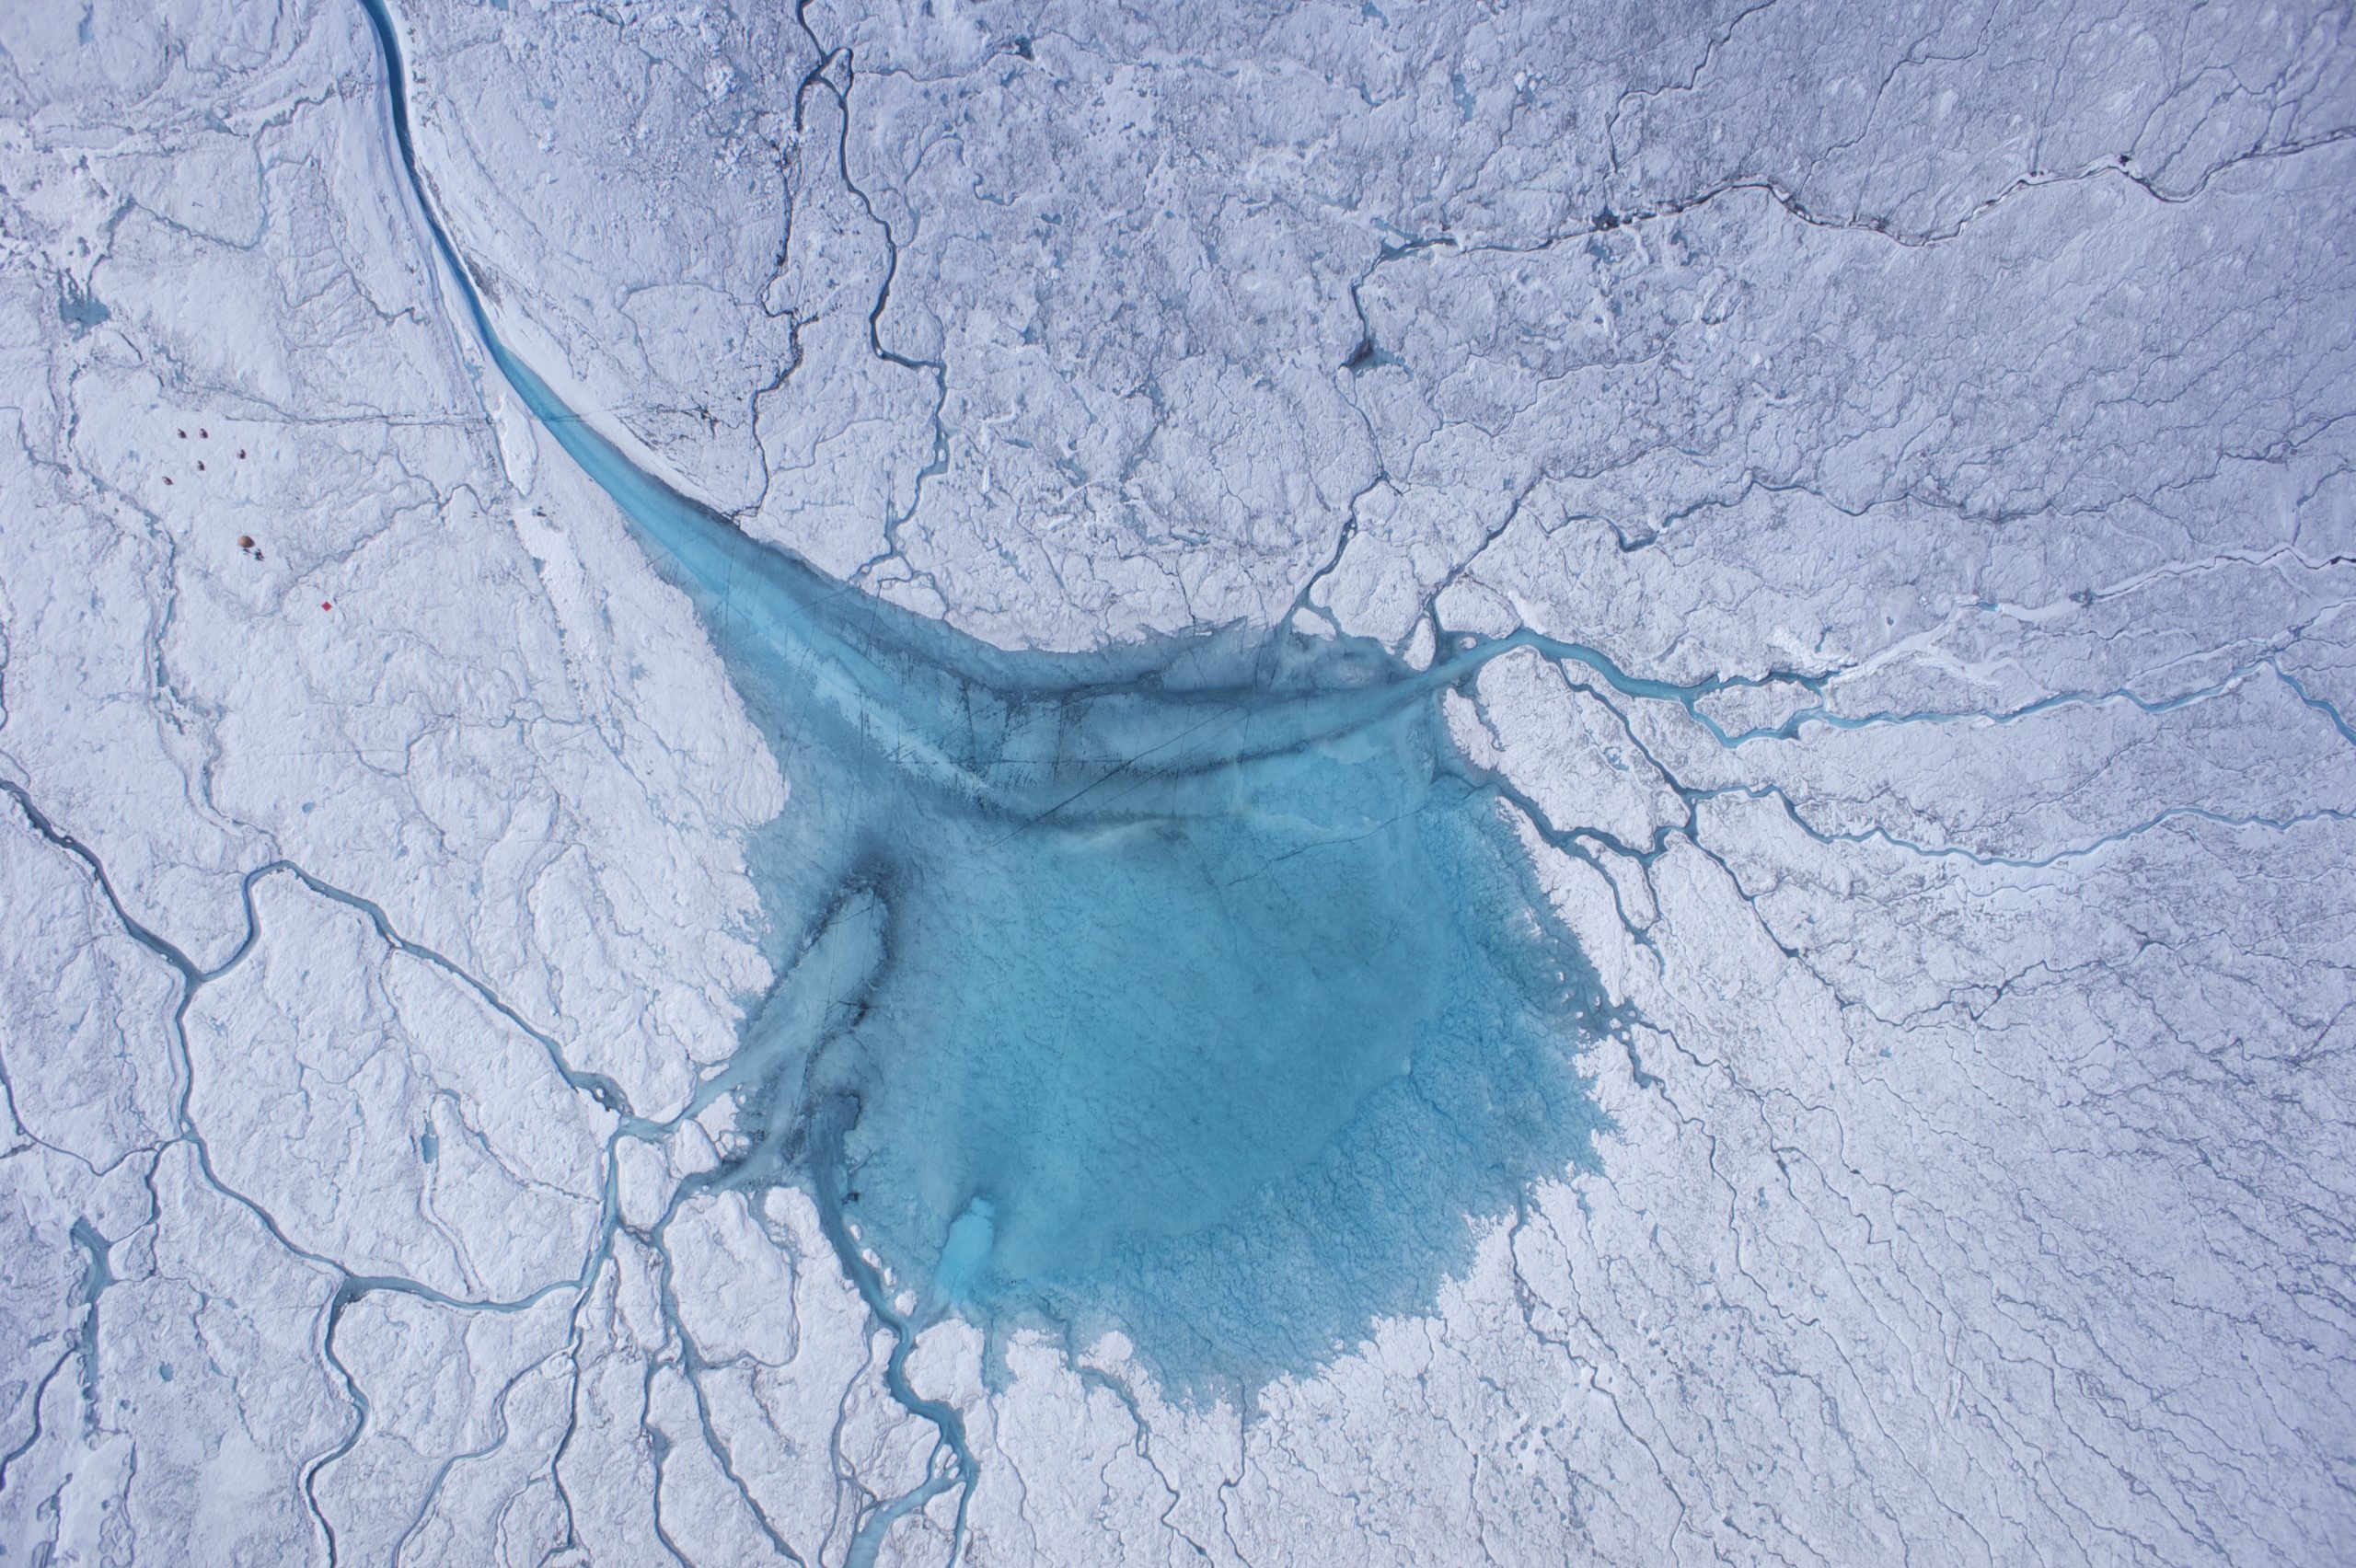 Drone view of a meltwater lake, Russell Glacier, Greenland